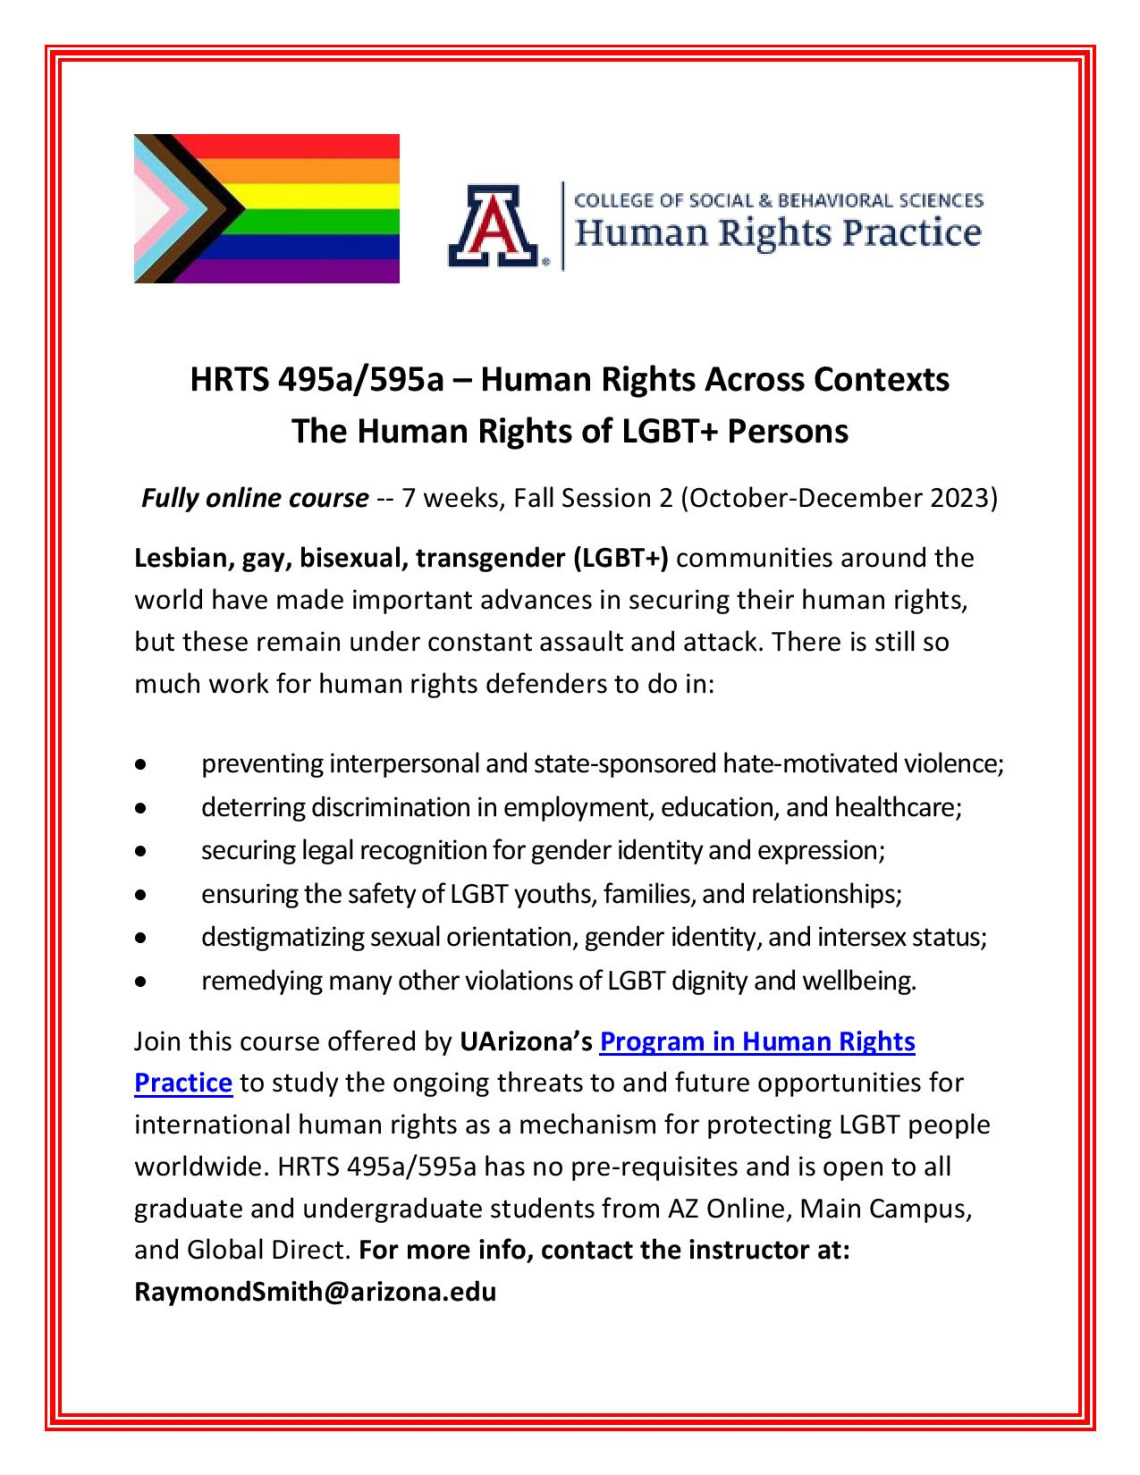 HRTS 495a-595a -- The Human Rights of LGBT Persons (fall 2023)